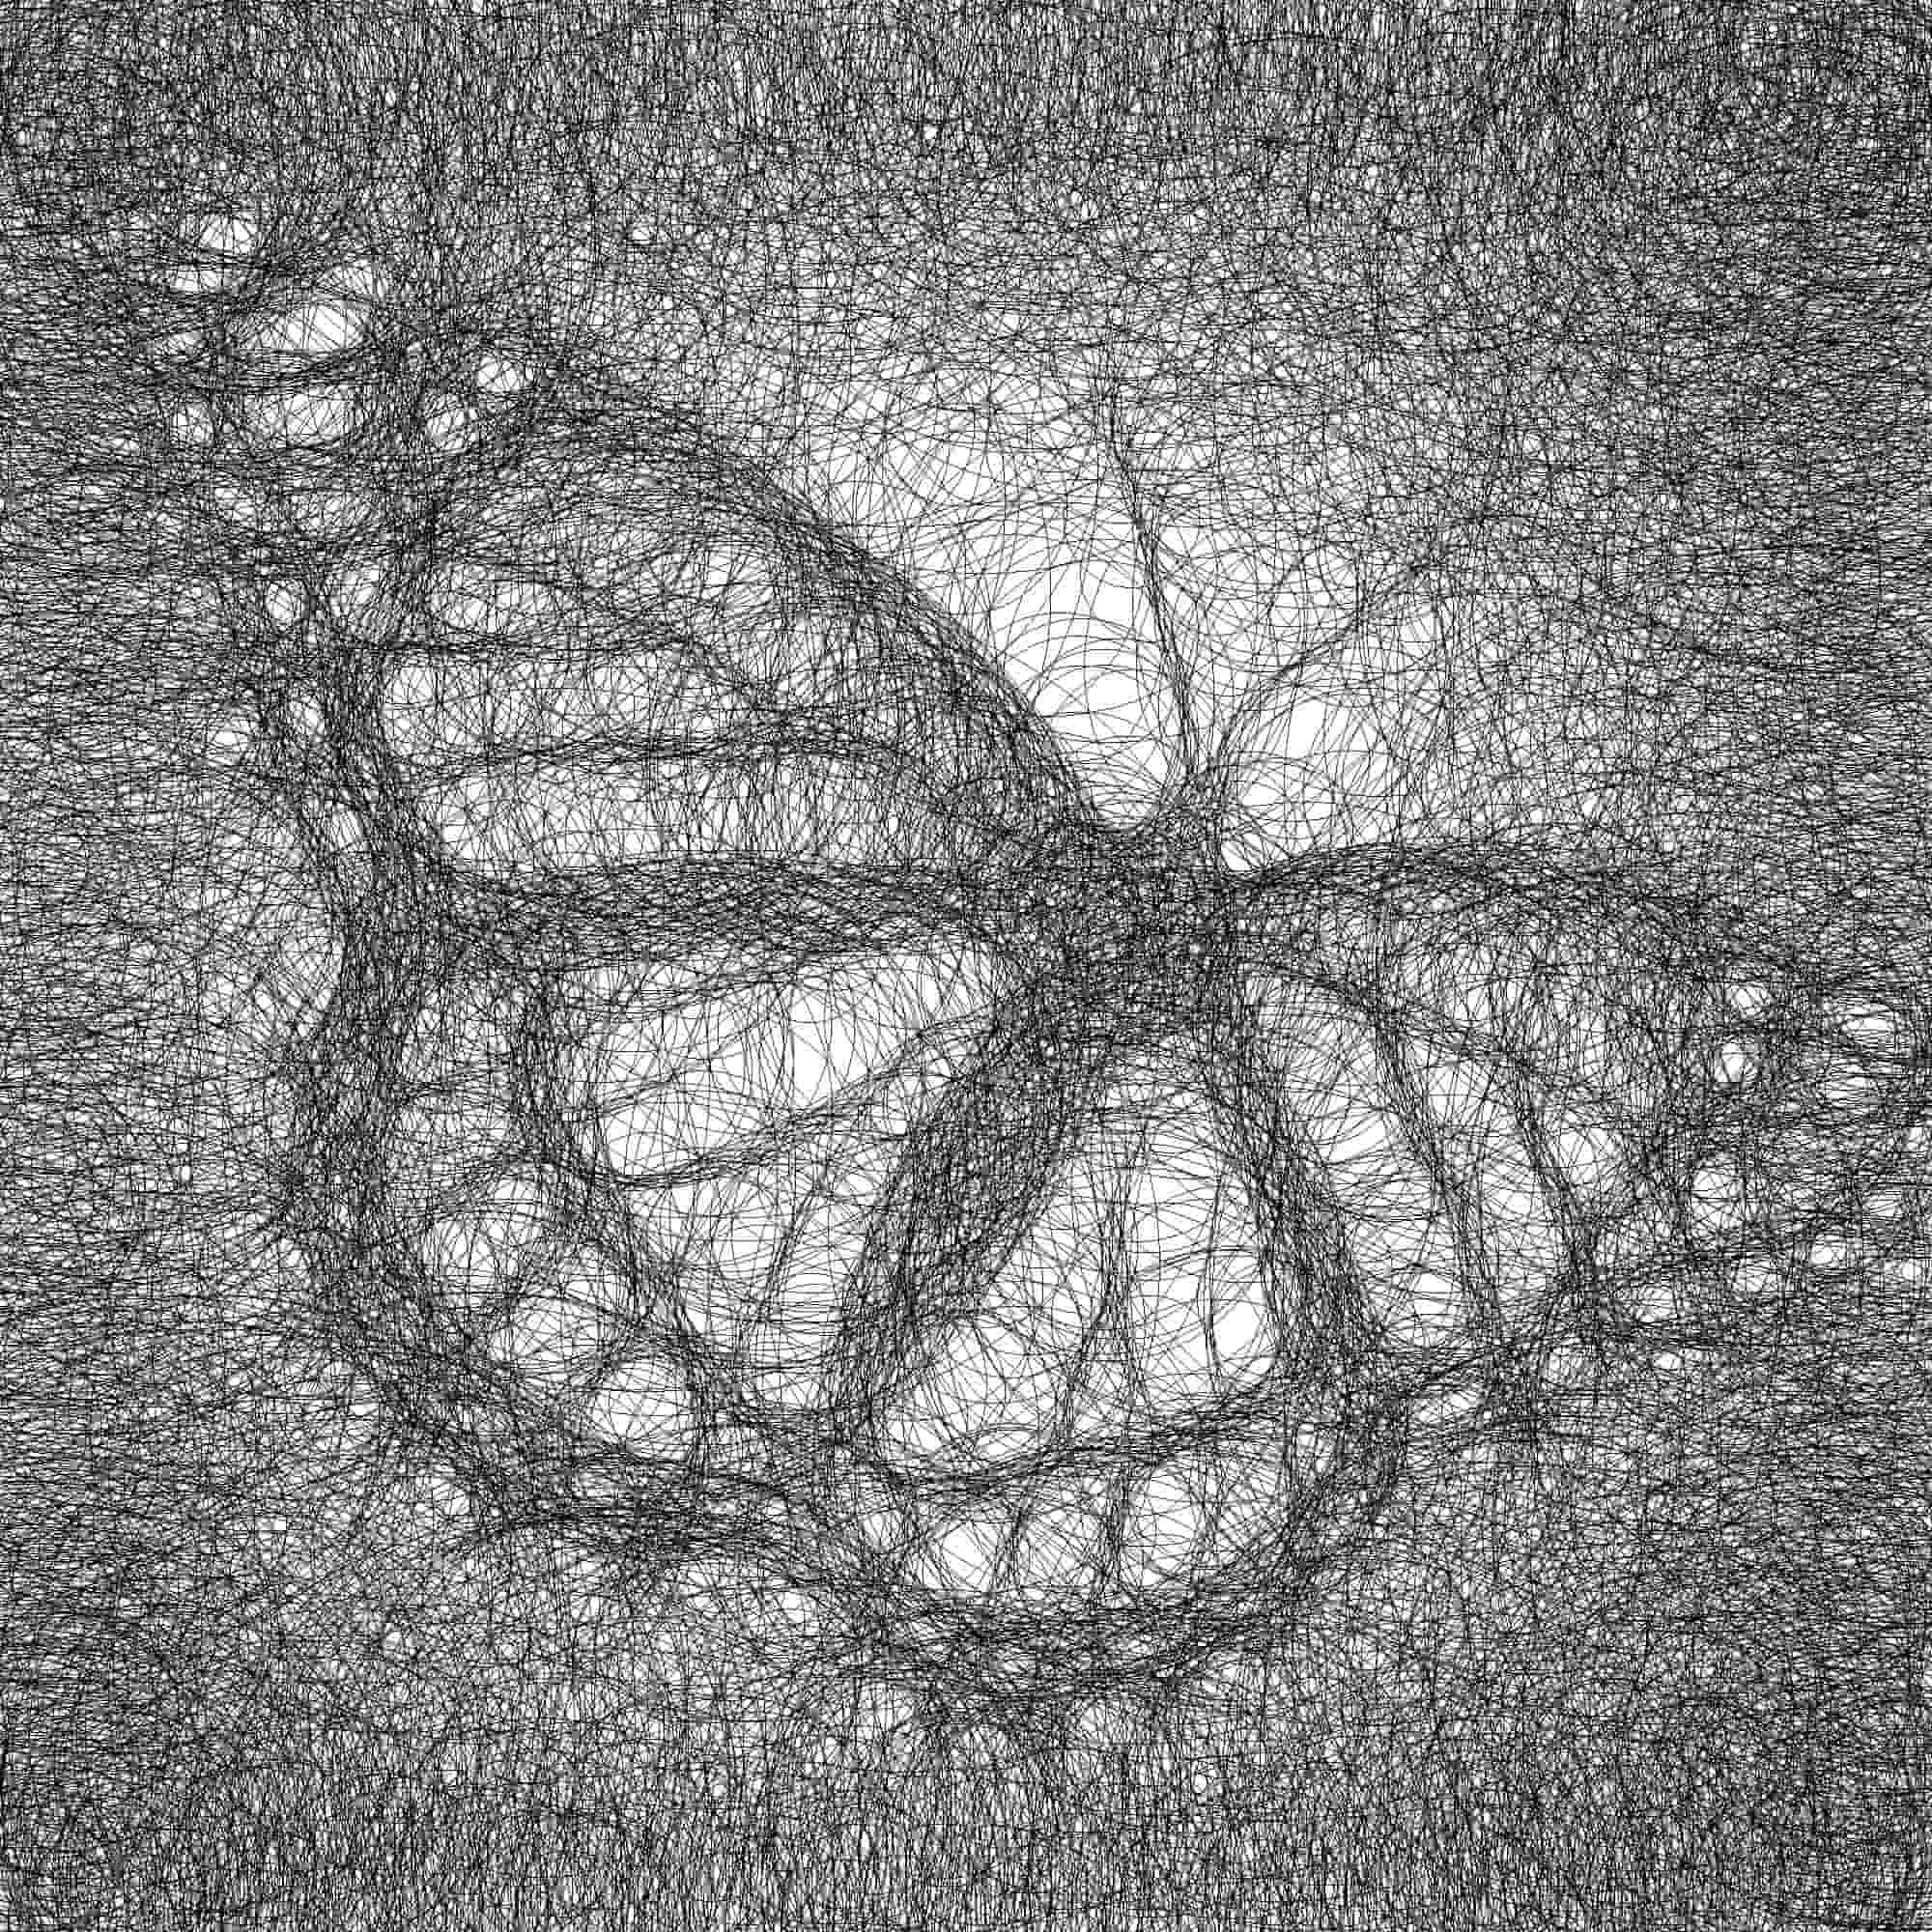 Butterfly, with circles